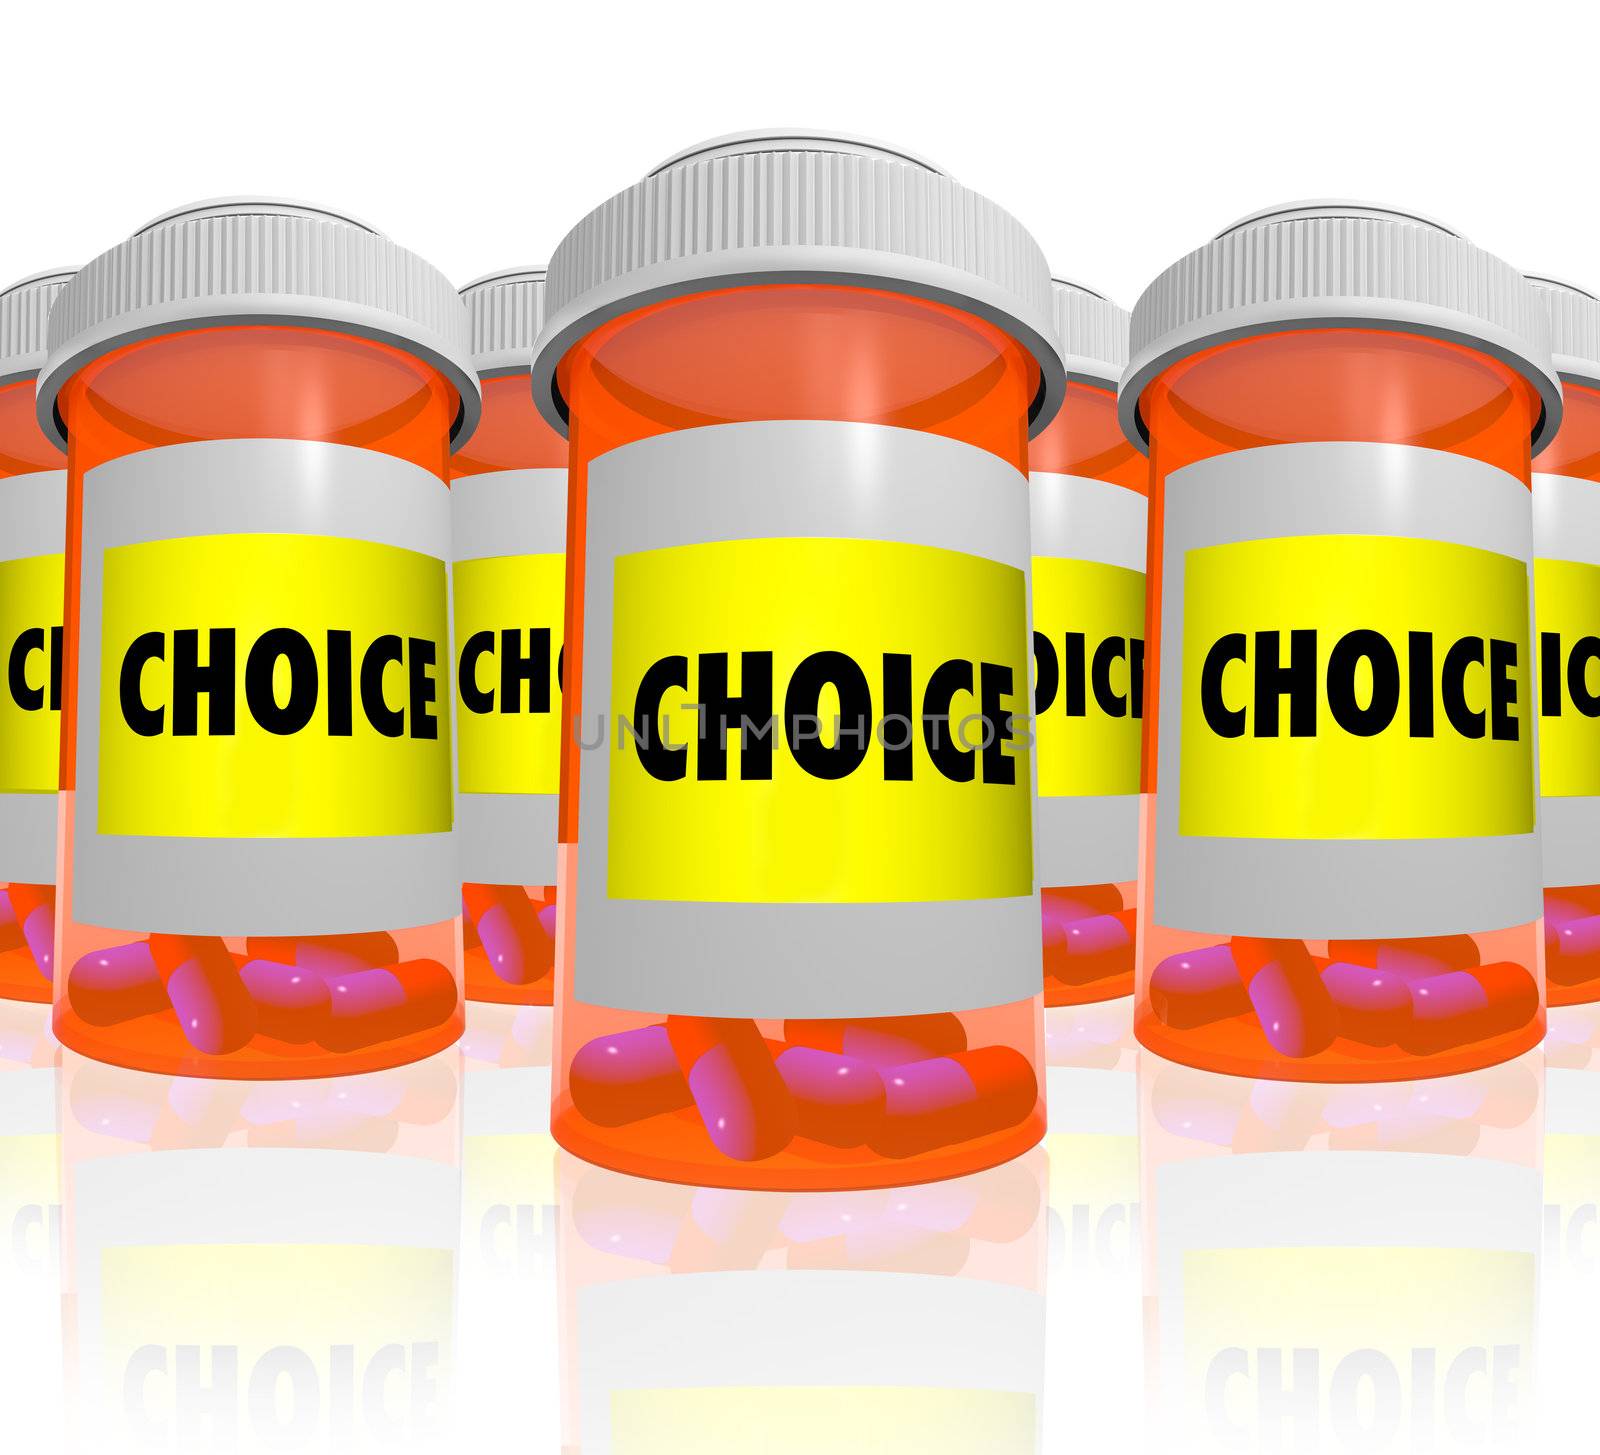 Choice - Choose from Many Prescription Bottles by iQoncept